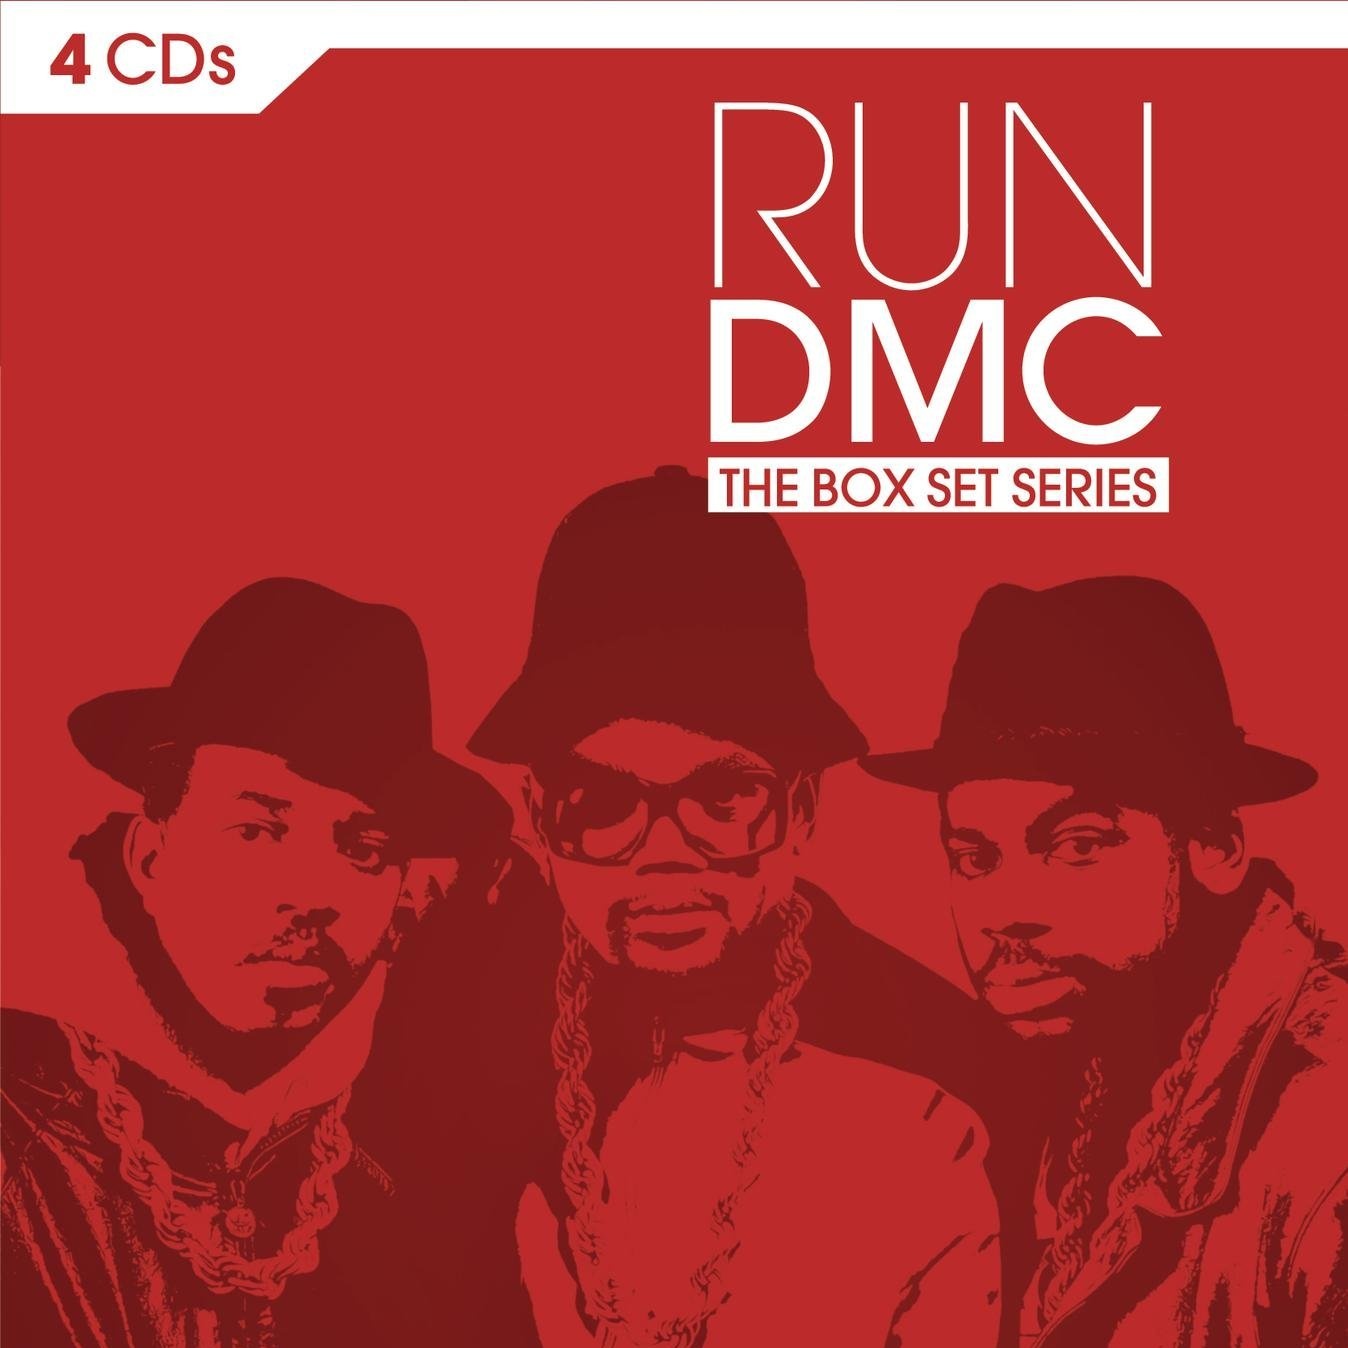 They Call Us Run-D.M.C